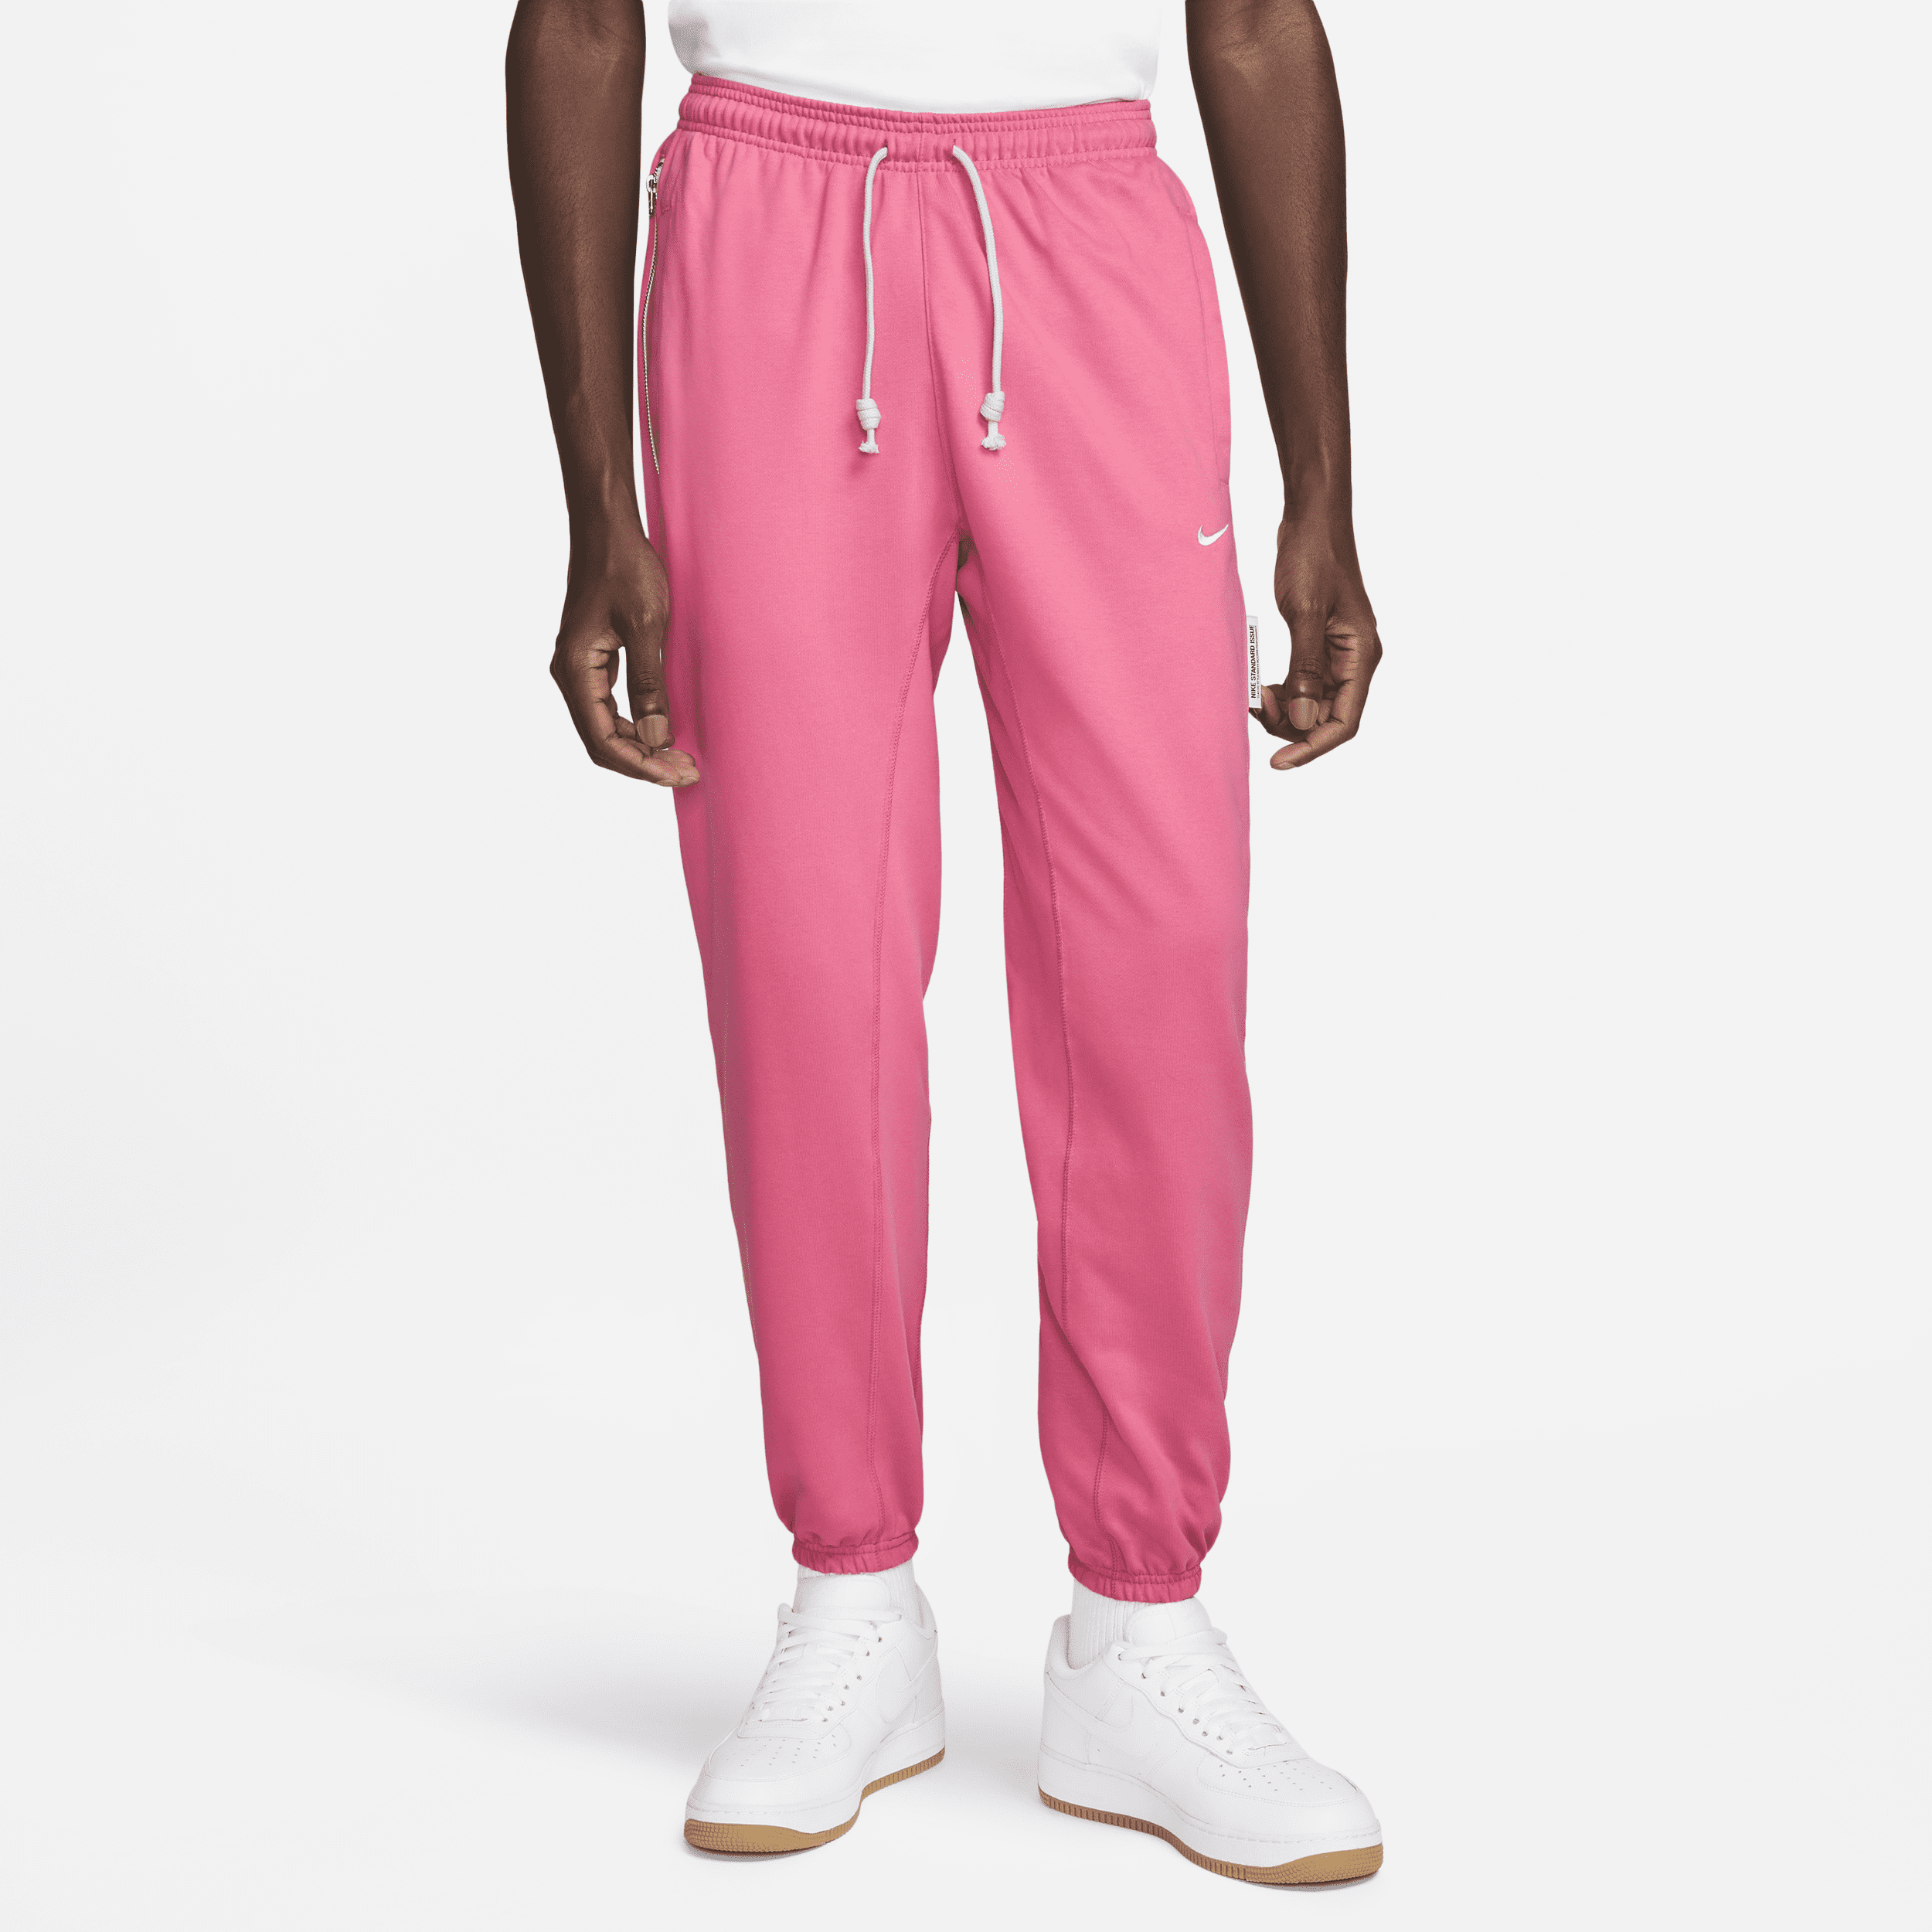 Nike Men's Standard Issue Dri-fit Basketball Pants In Pink